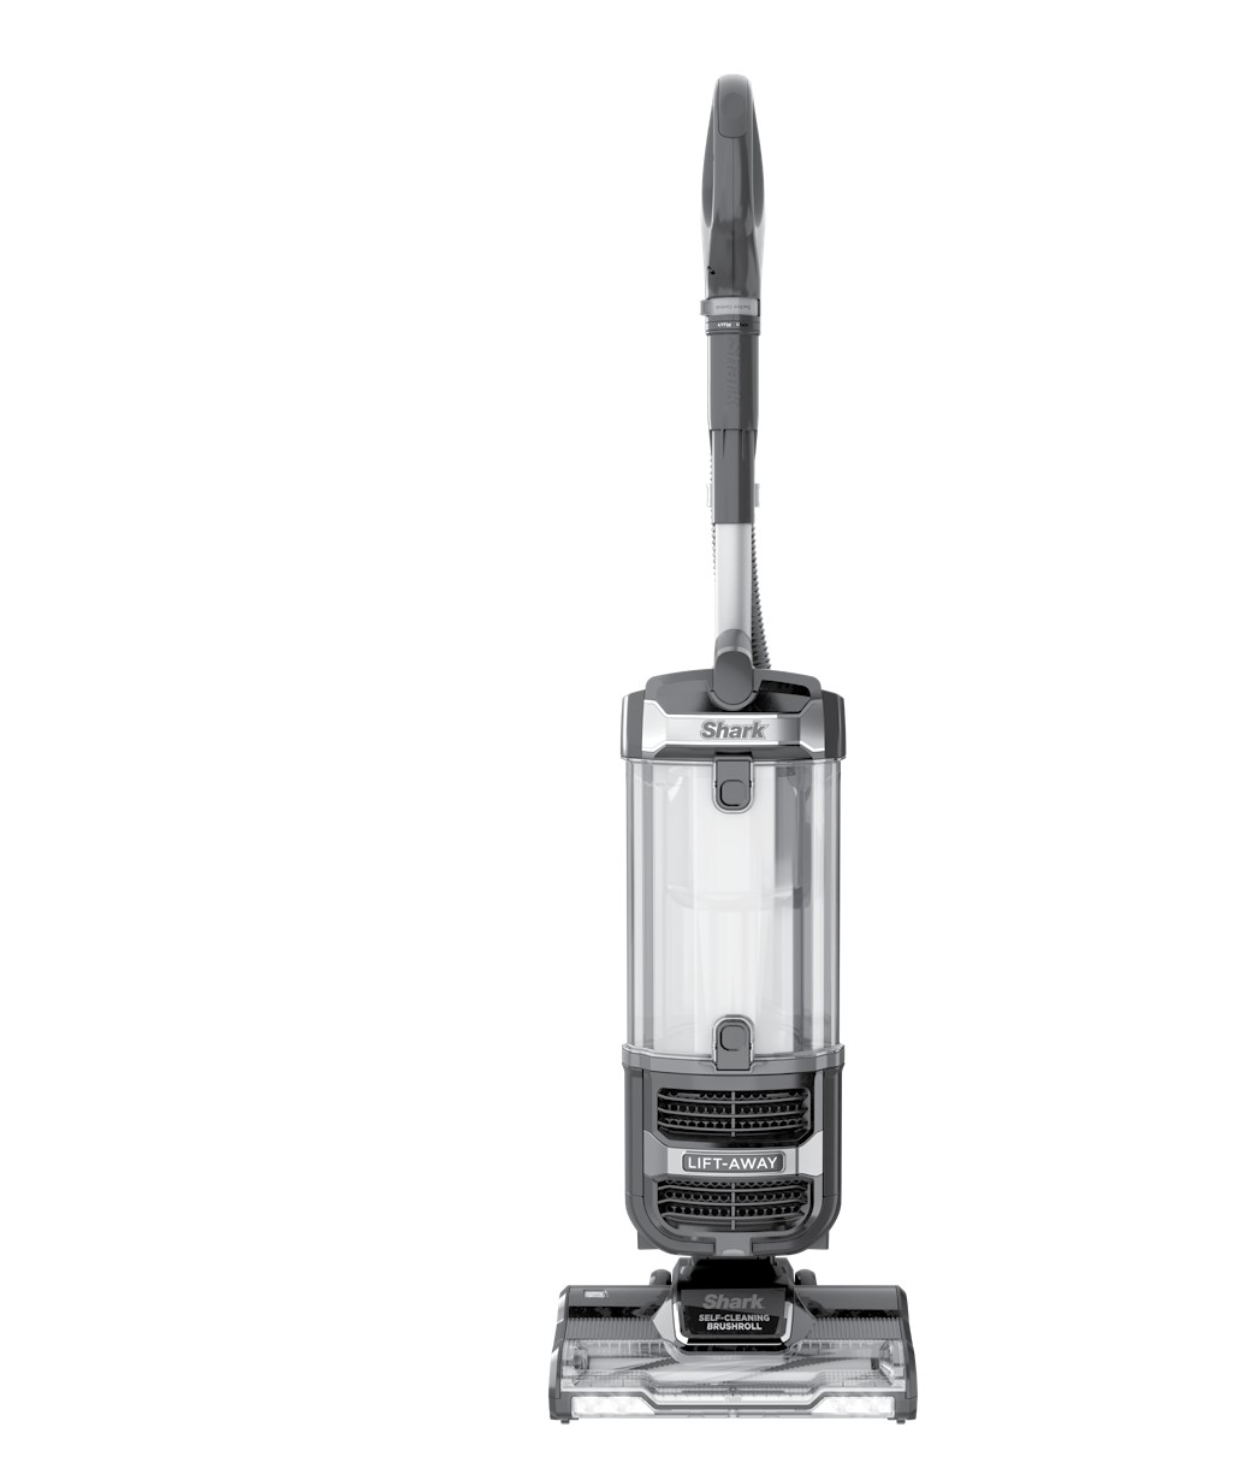 Shark Rotator Powered Lift-Away Vacuum - cleans surfaces properly